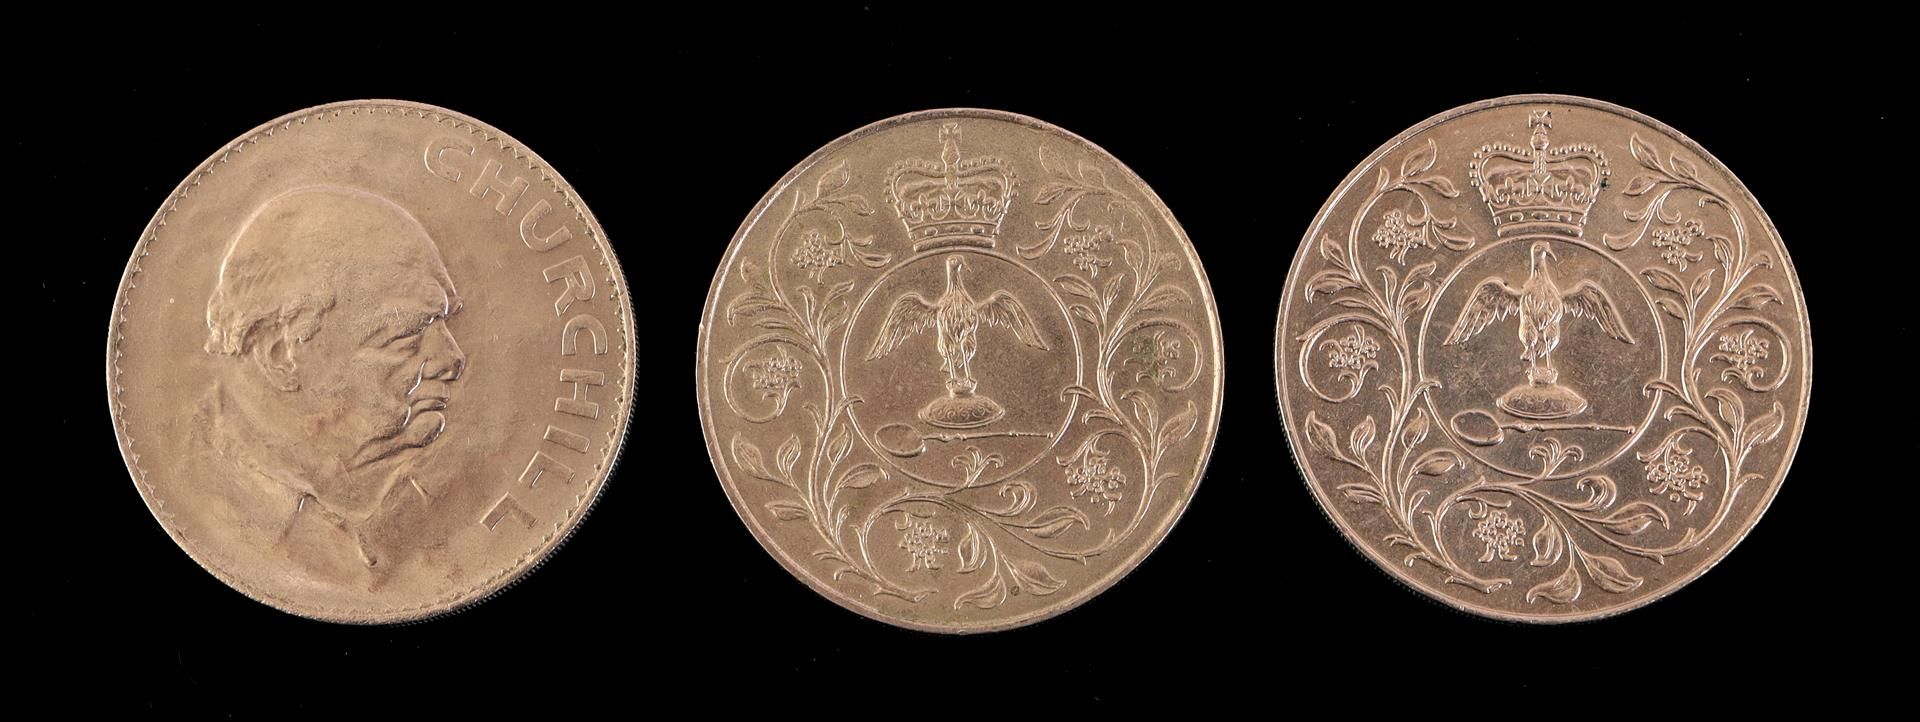 3 English commemorative coins - Image 2 of 2